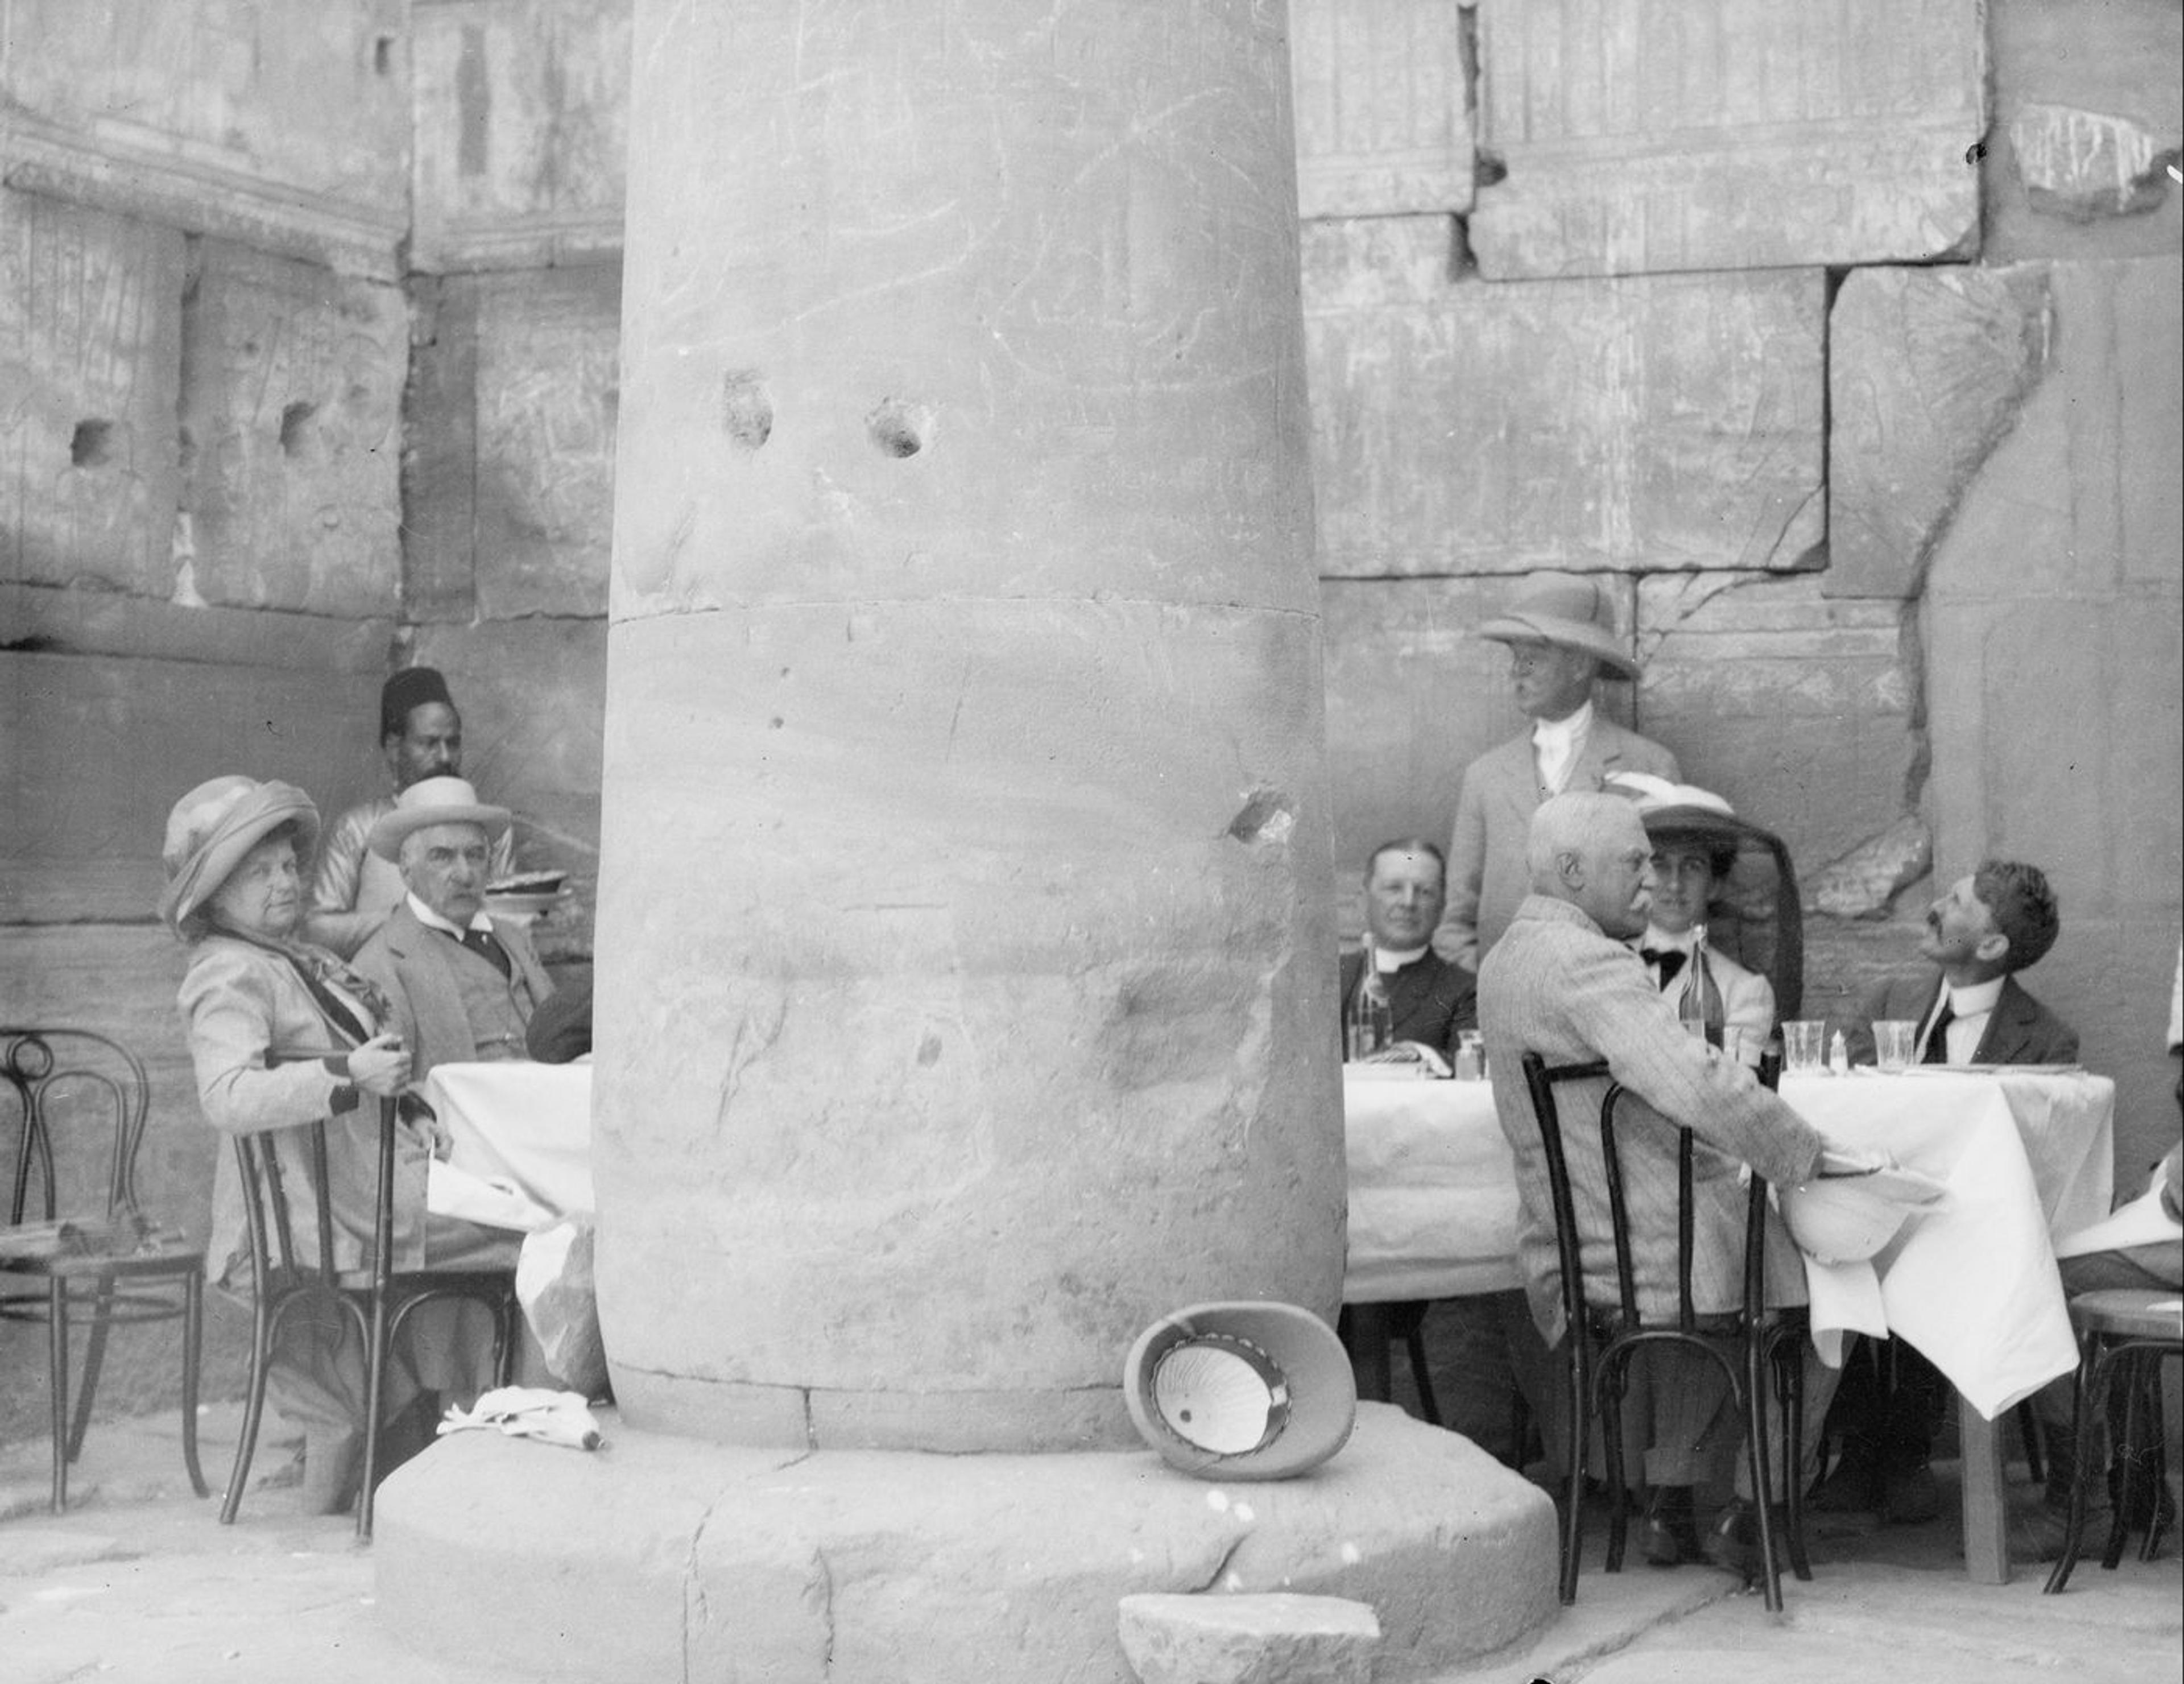 Old photograph of men and women dining at a table near a stone excavation site